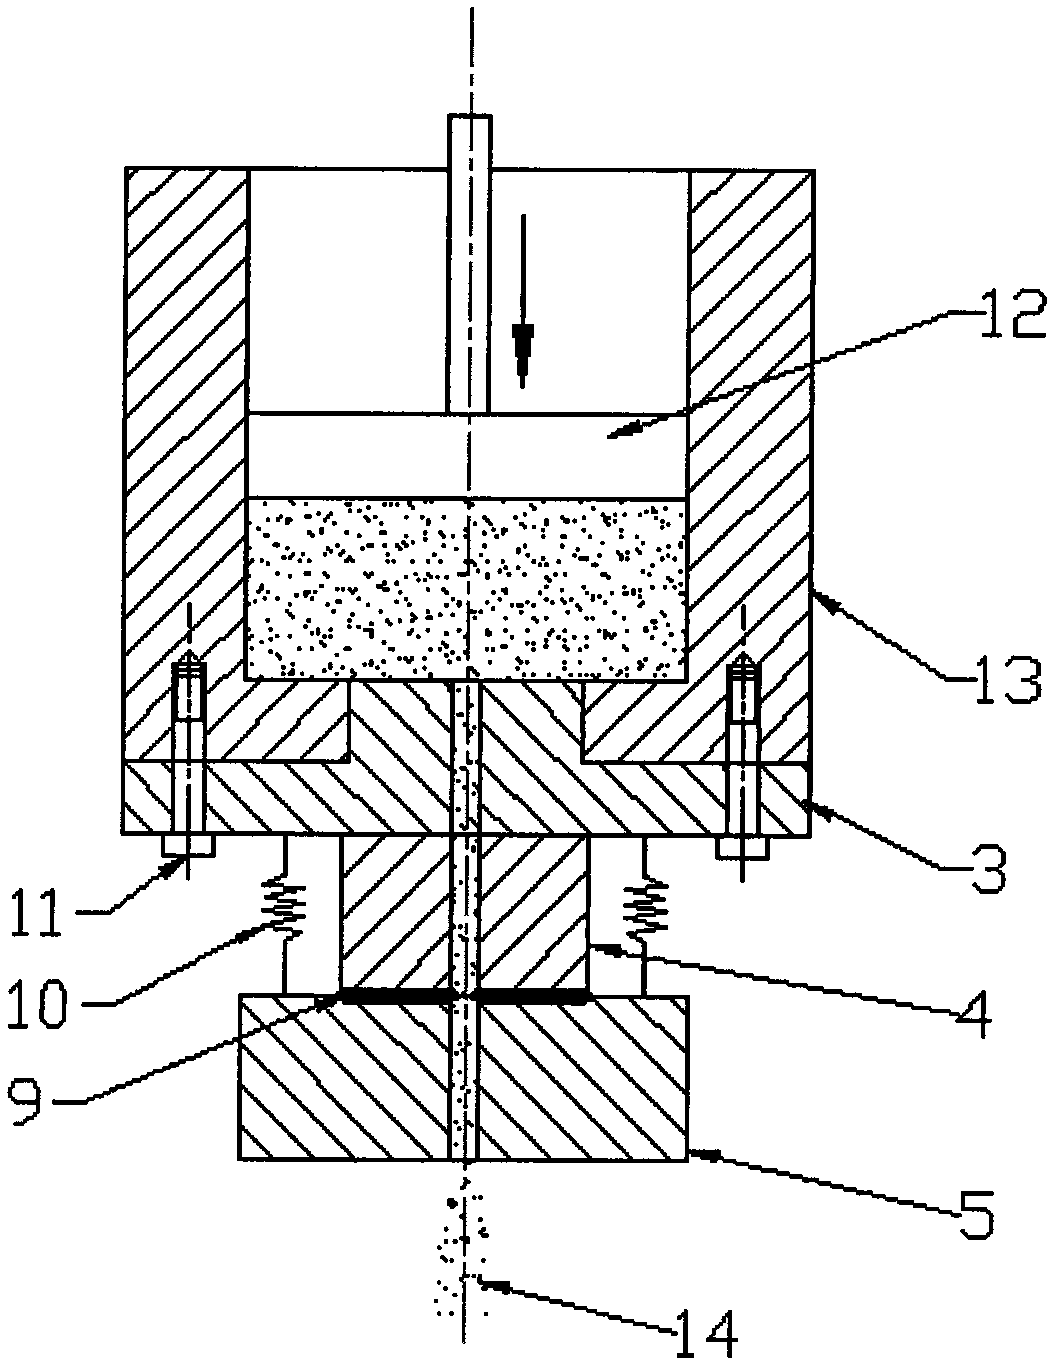 Method for measuring fluid shear stress in capillary and device